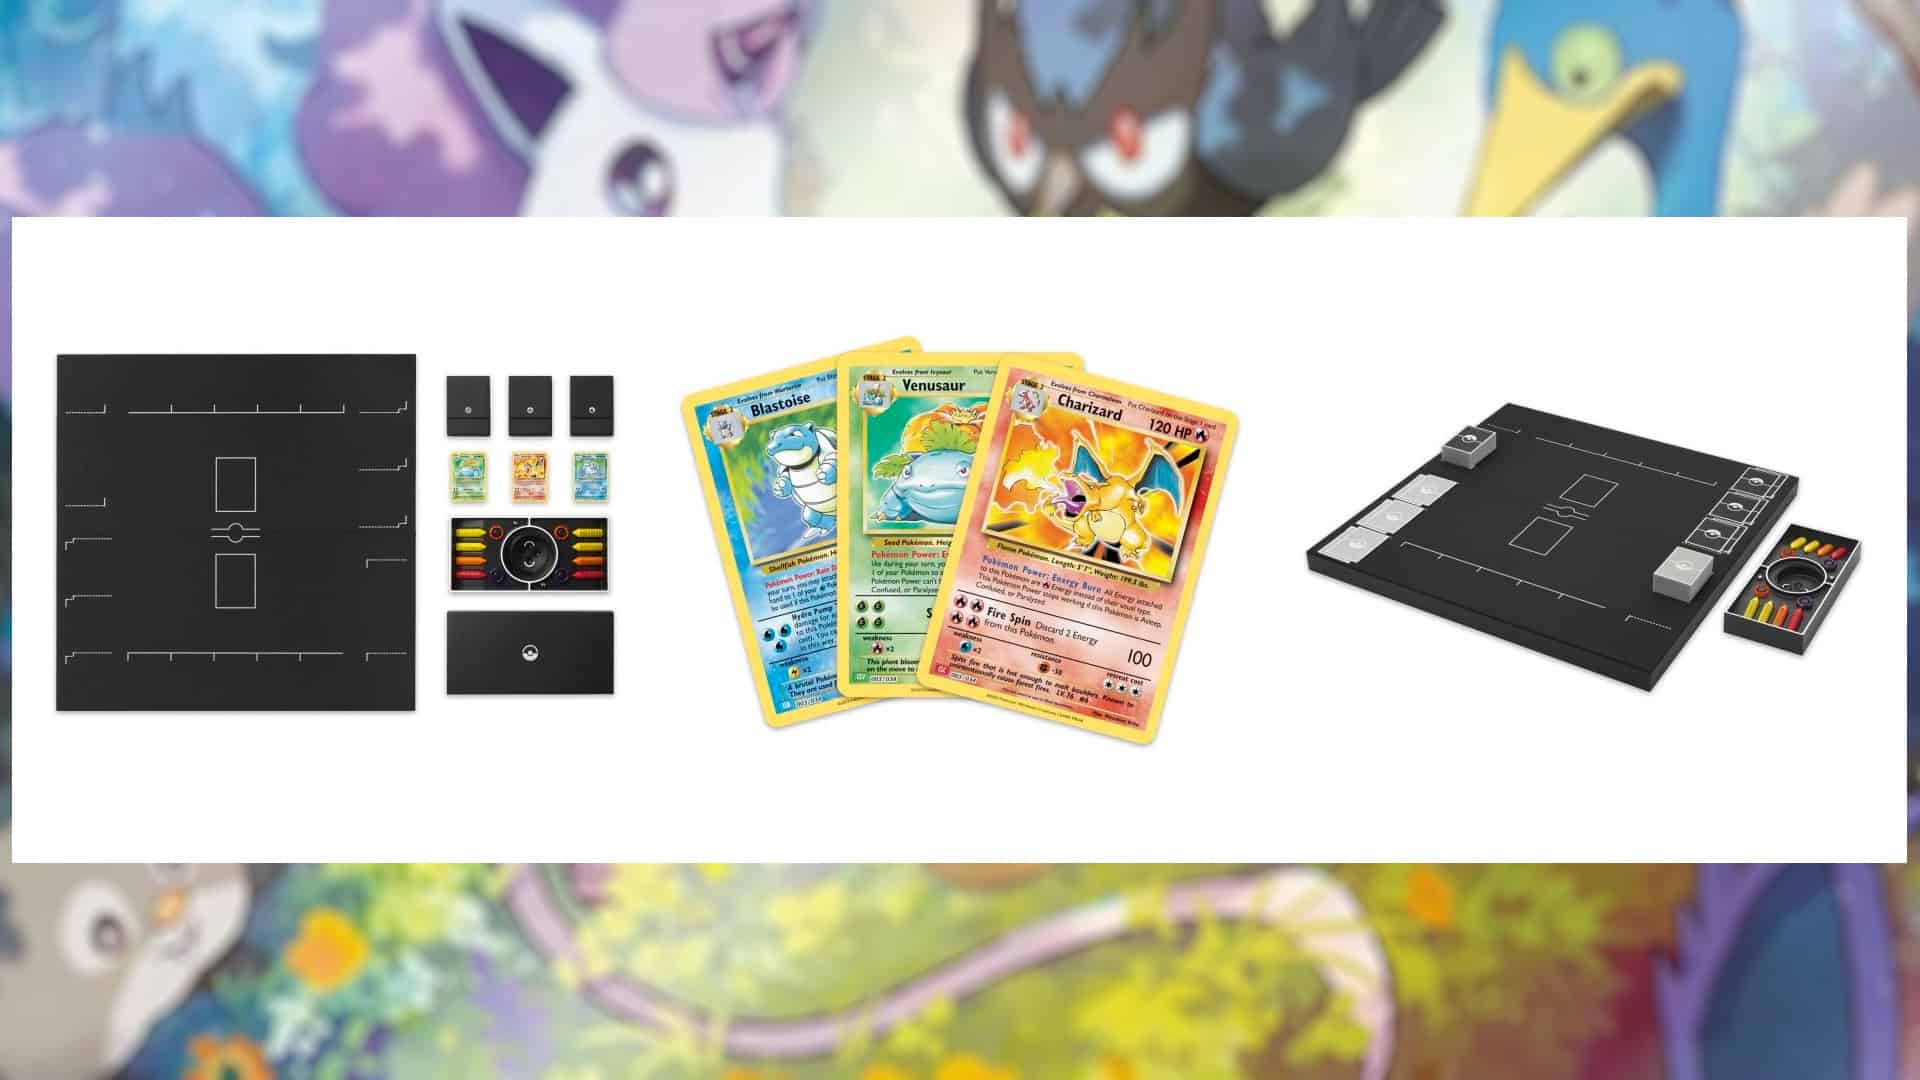 Pokemon TCG Classic release date revealed with Pokemon cards and other items.